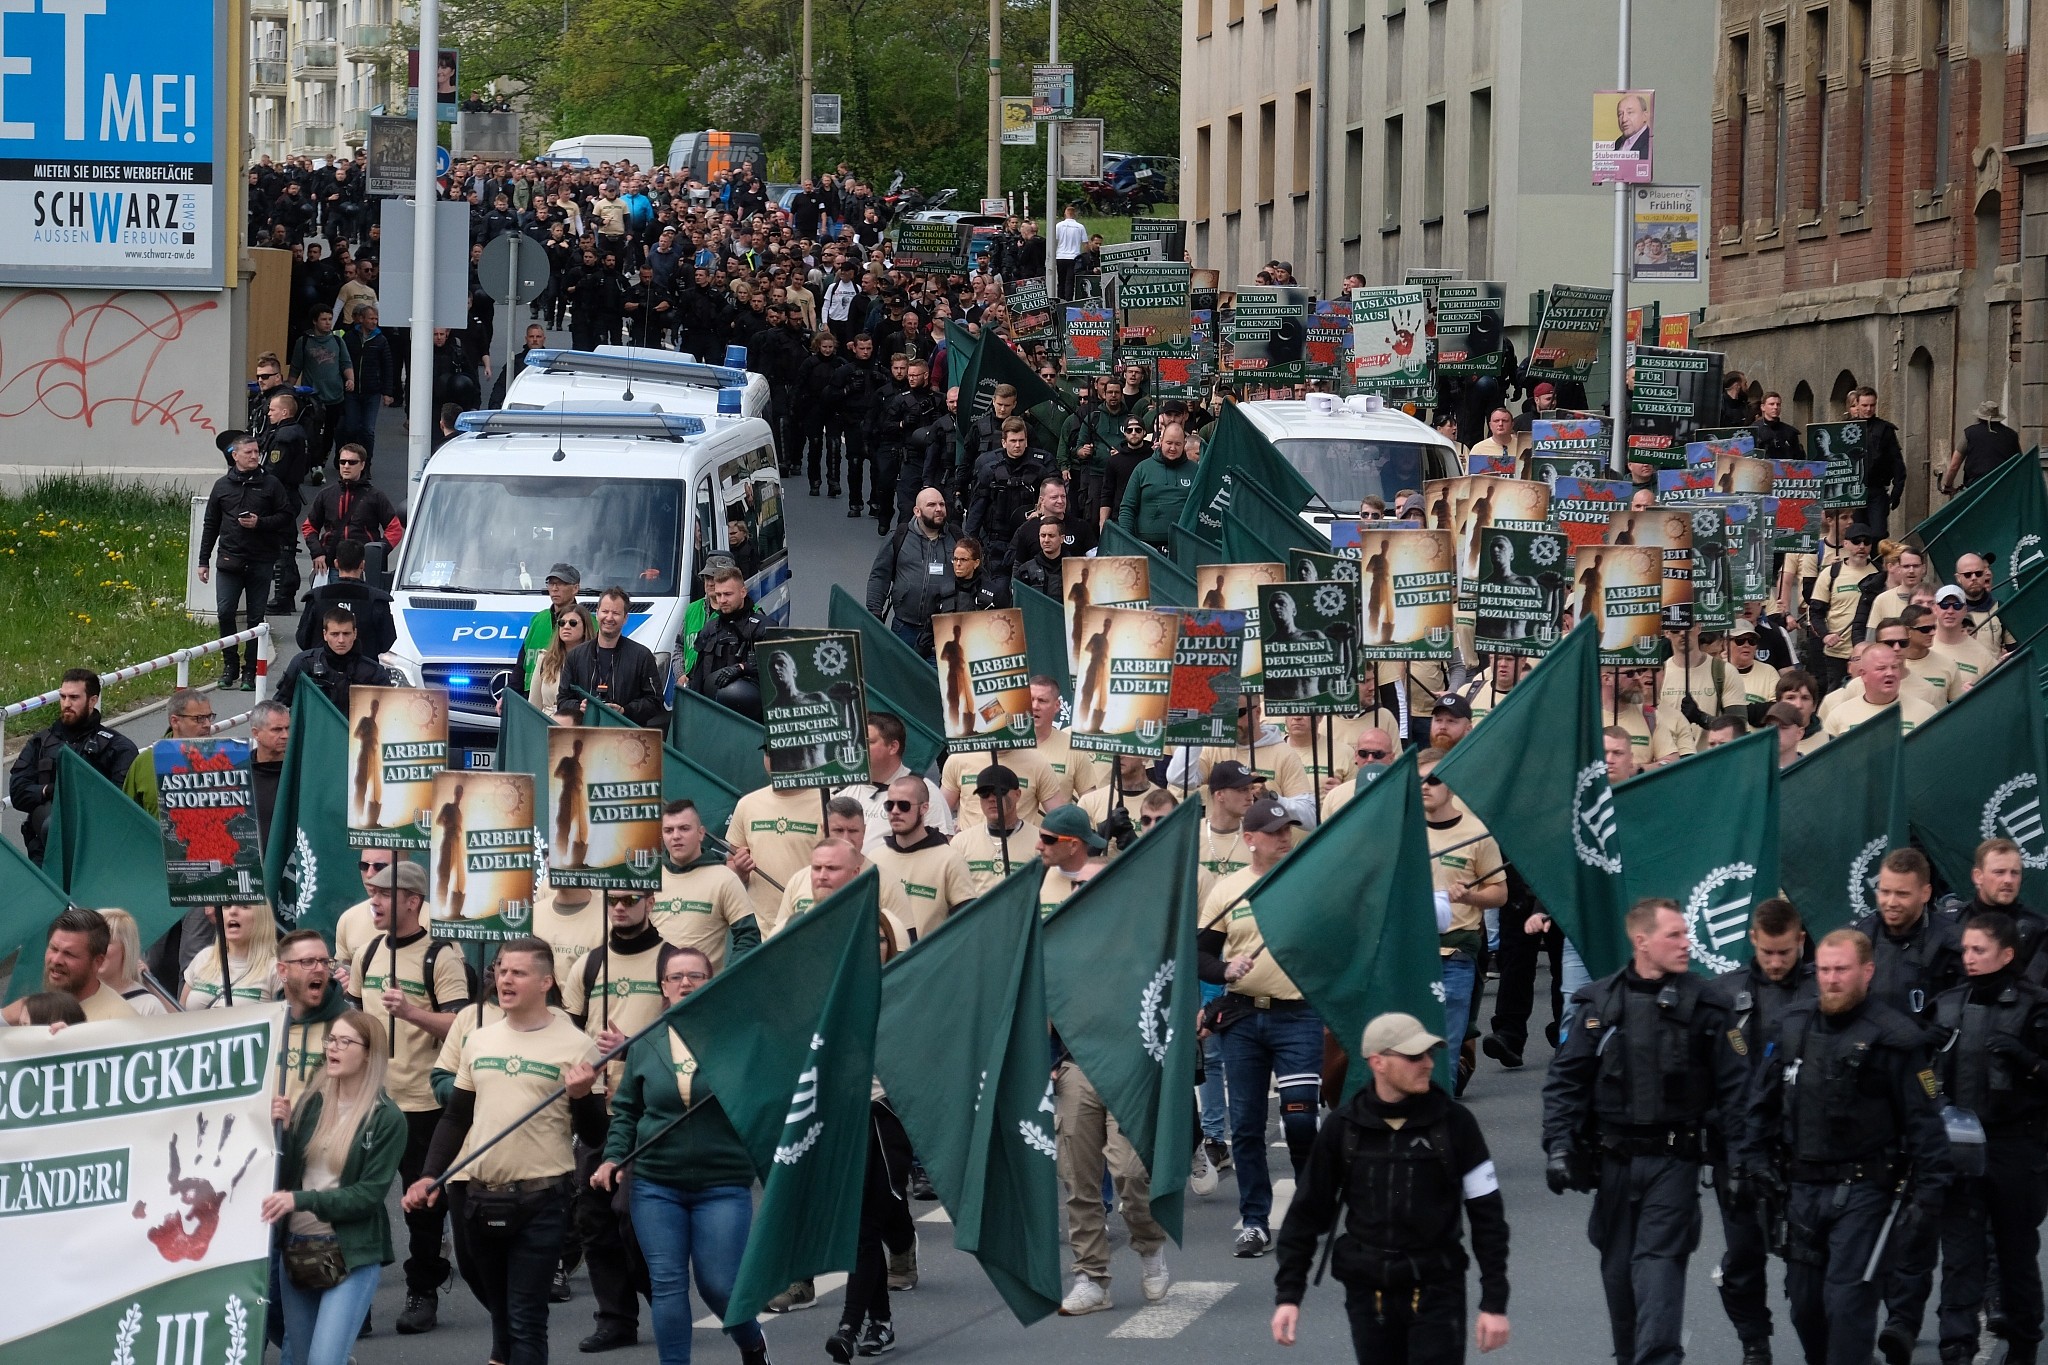 German Jews outraged after police allow neo-Nazis to march through town